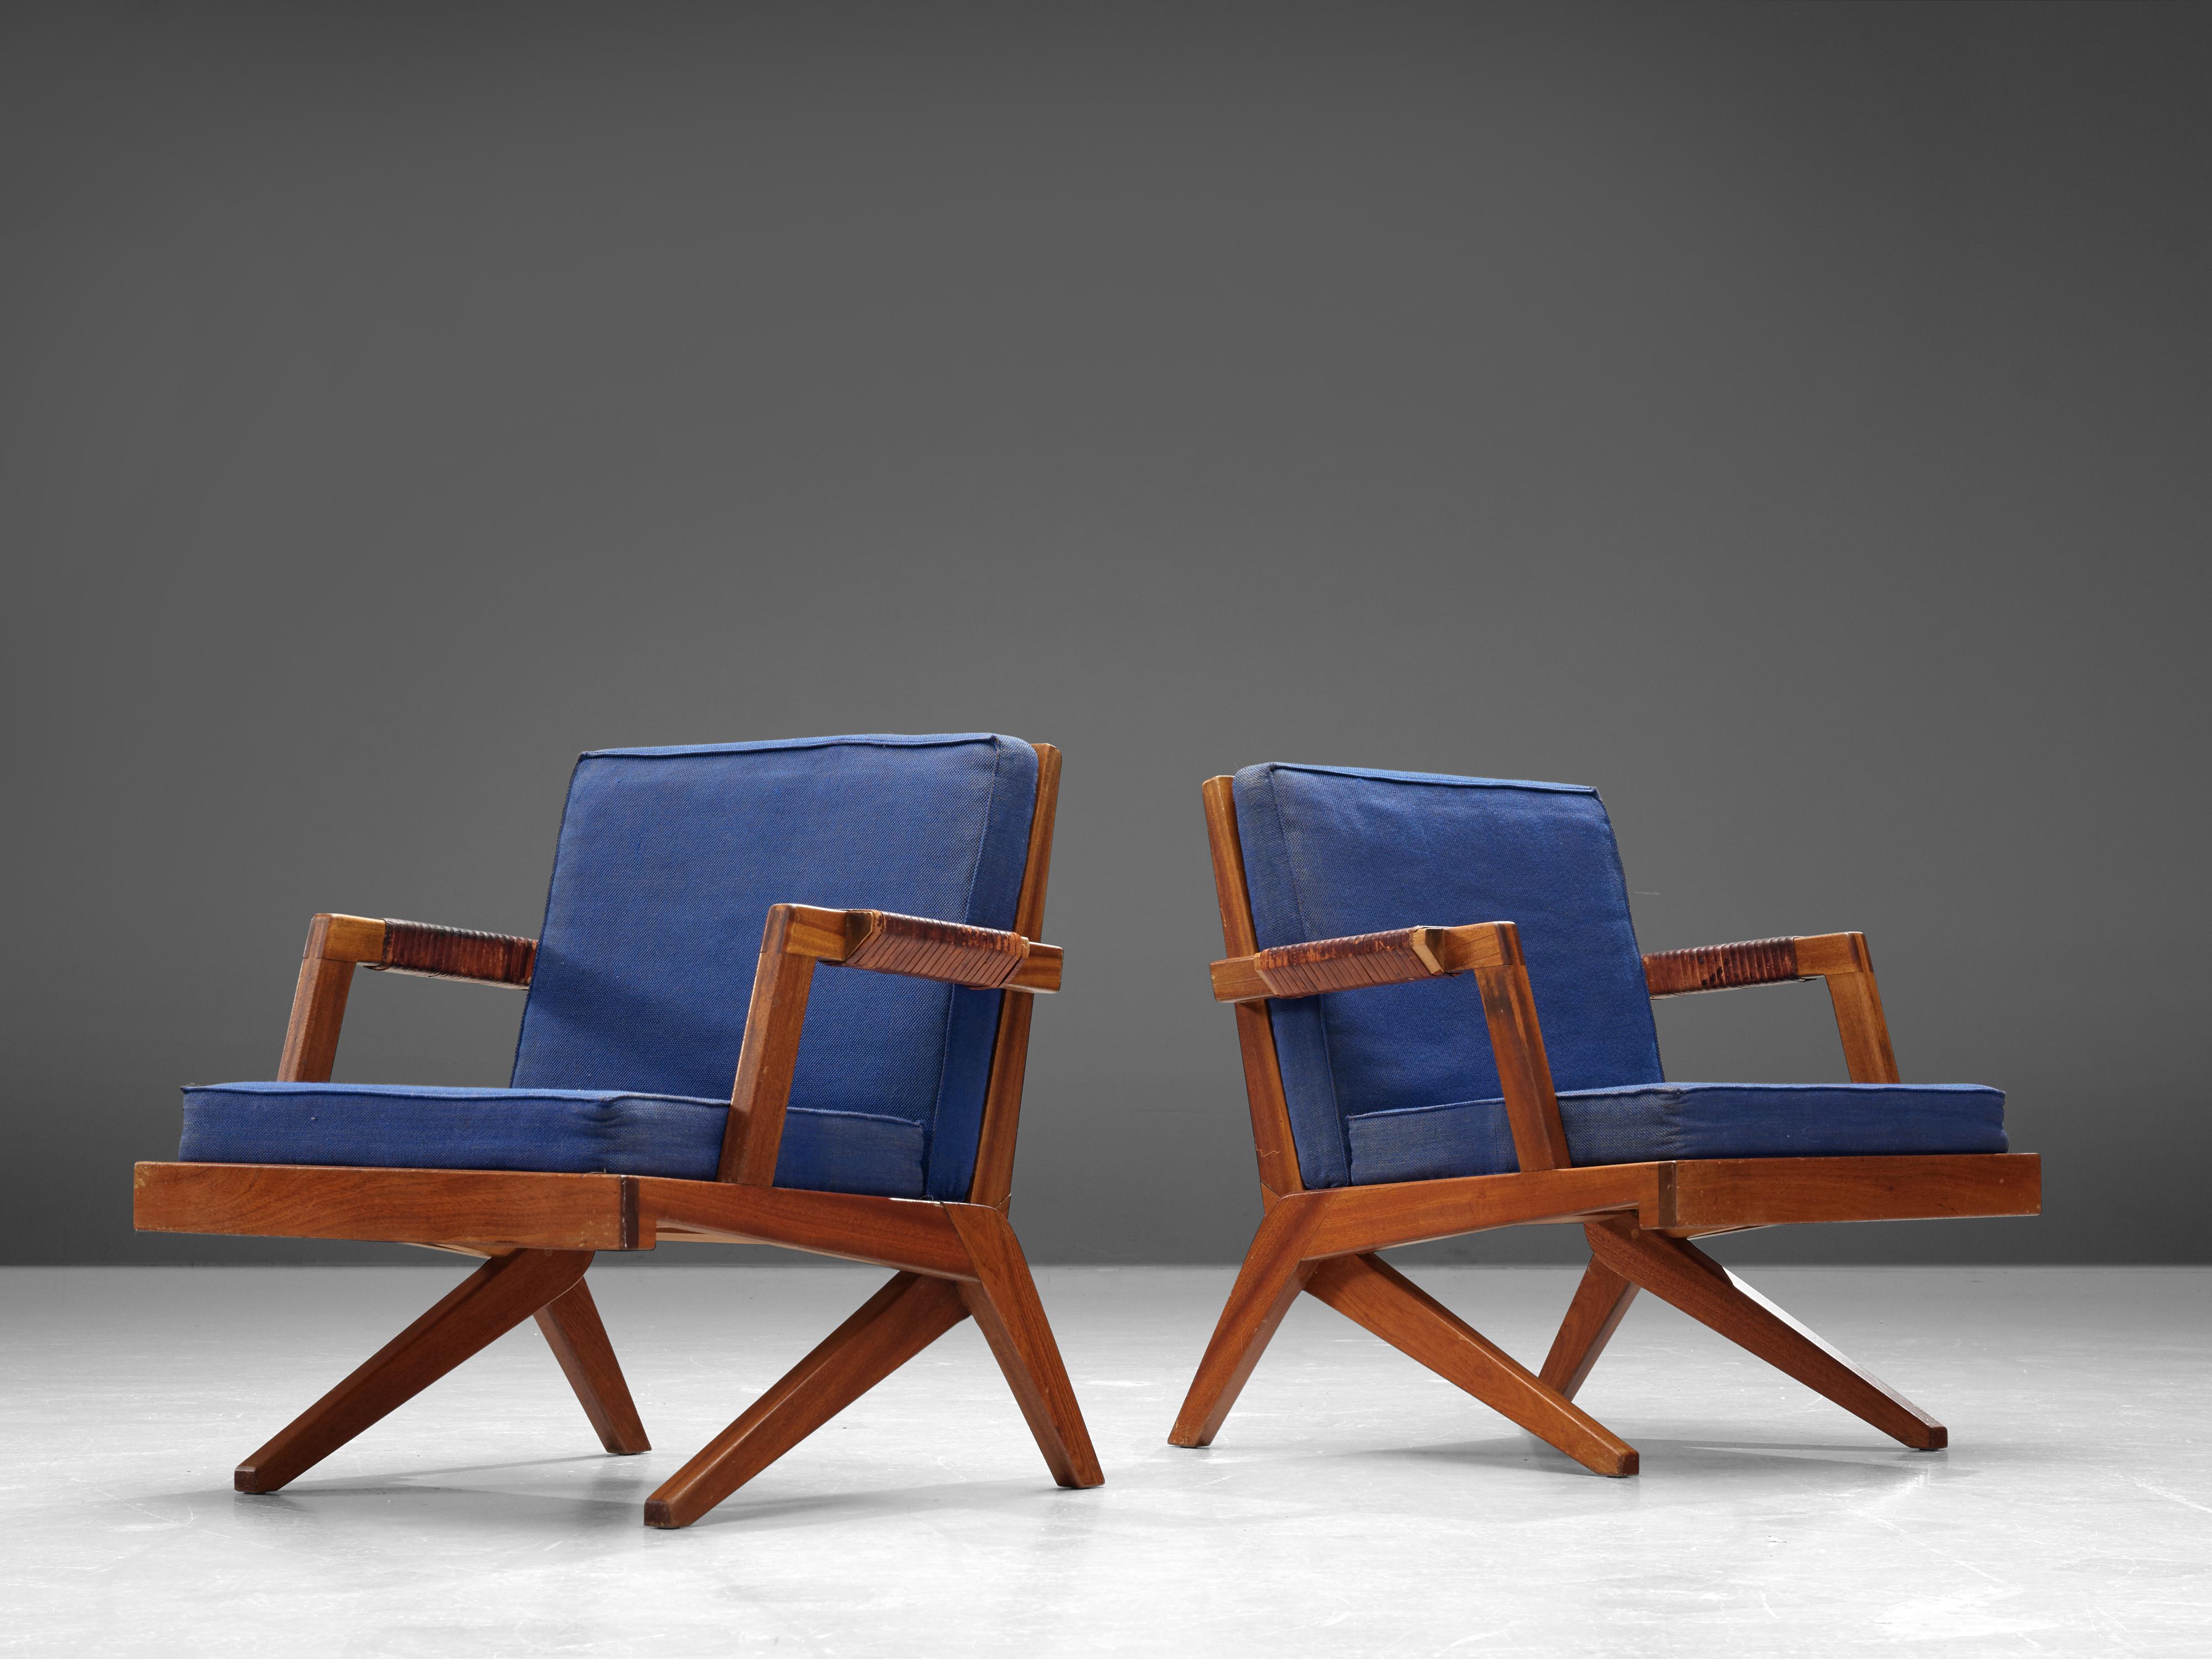 Finnish Olavi Hanninen 'Boomerang' Lounge Chairs with Blue Upholstery